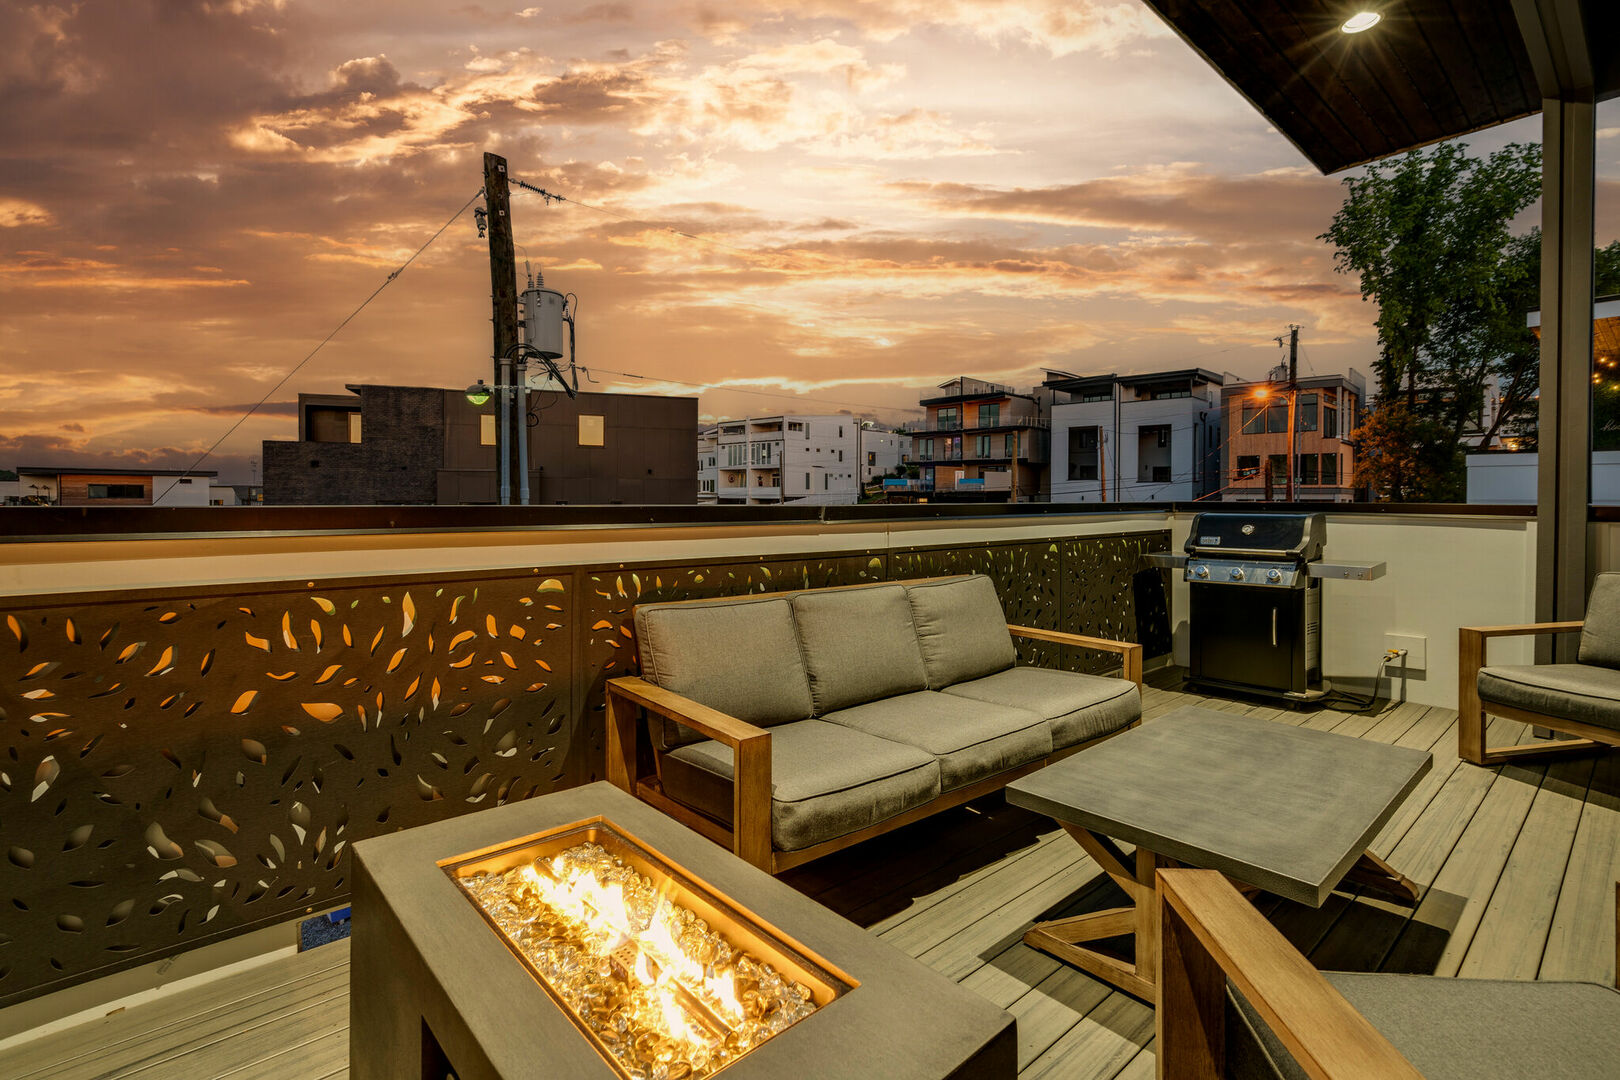 Unit 3: Rooftop balcony with outdoor BBQ, smart TV, fire pit, and seating.